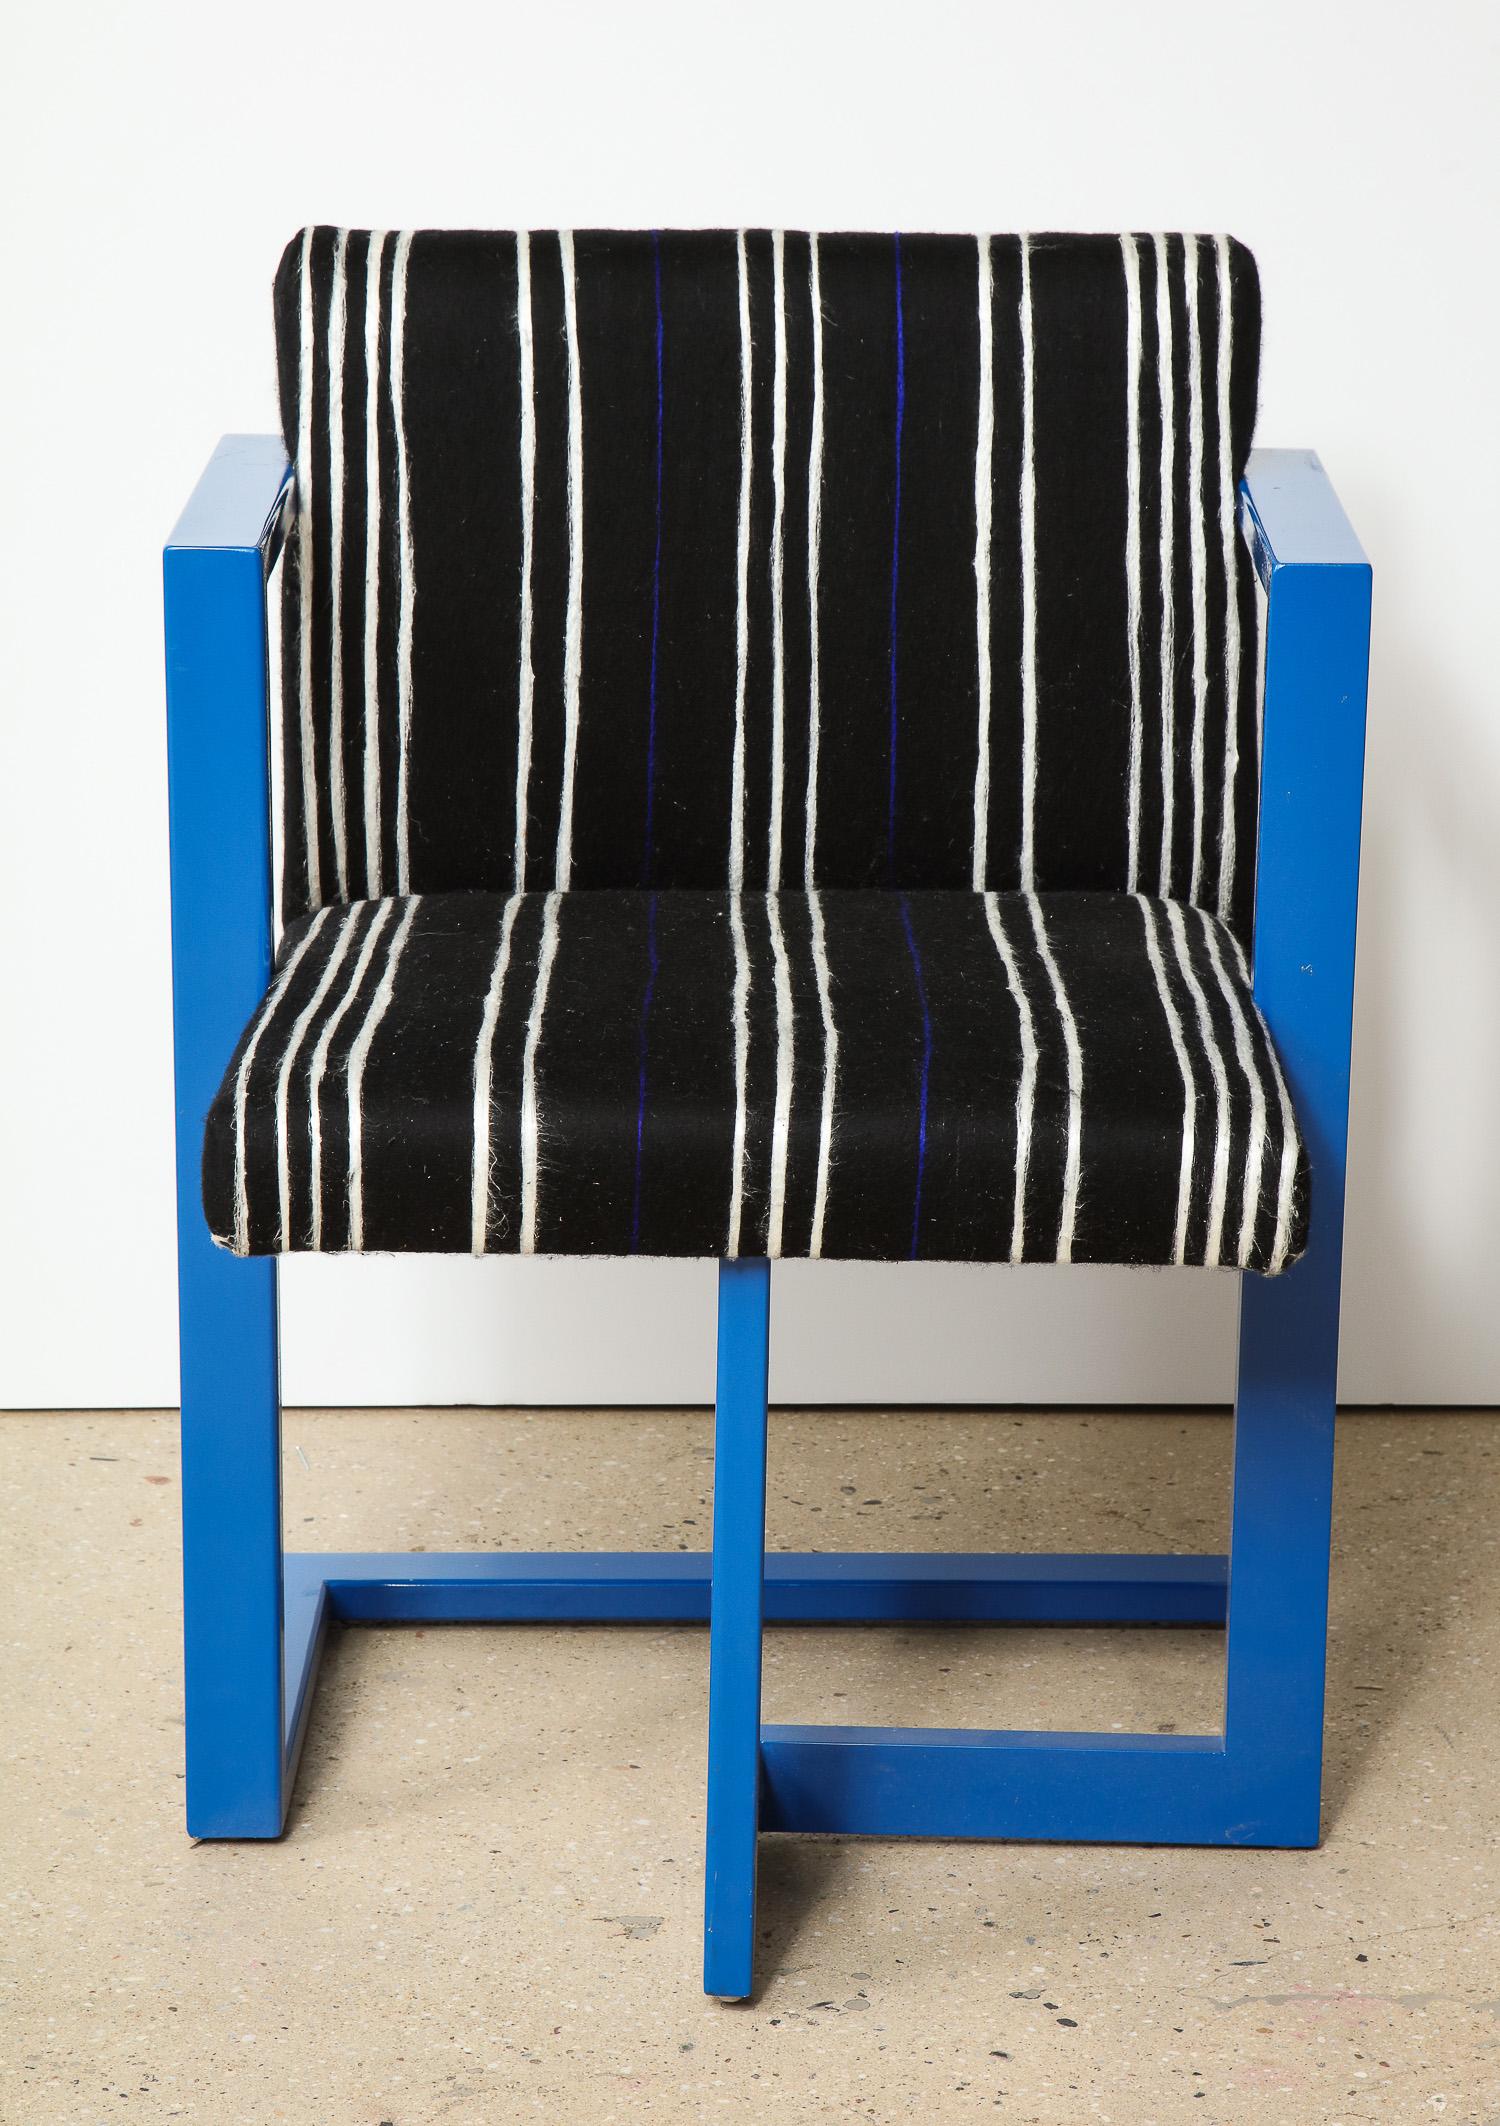 A custom enamled steel sculptural chair, made in the USA to order in a variety of finishes.